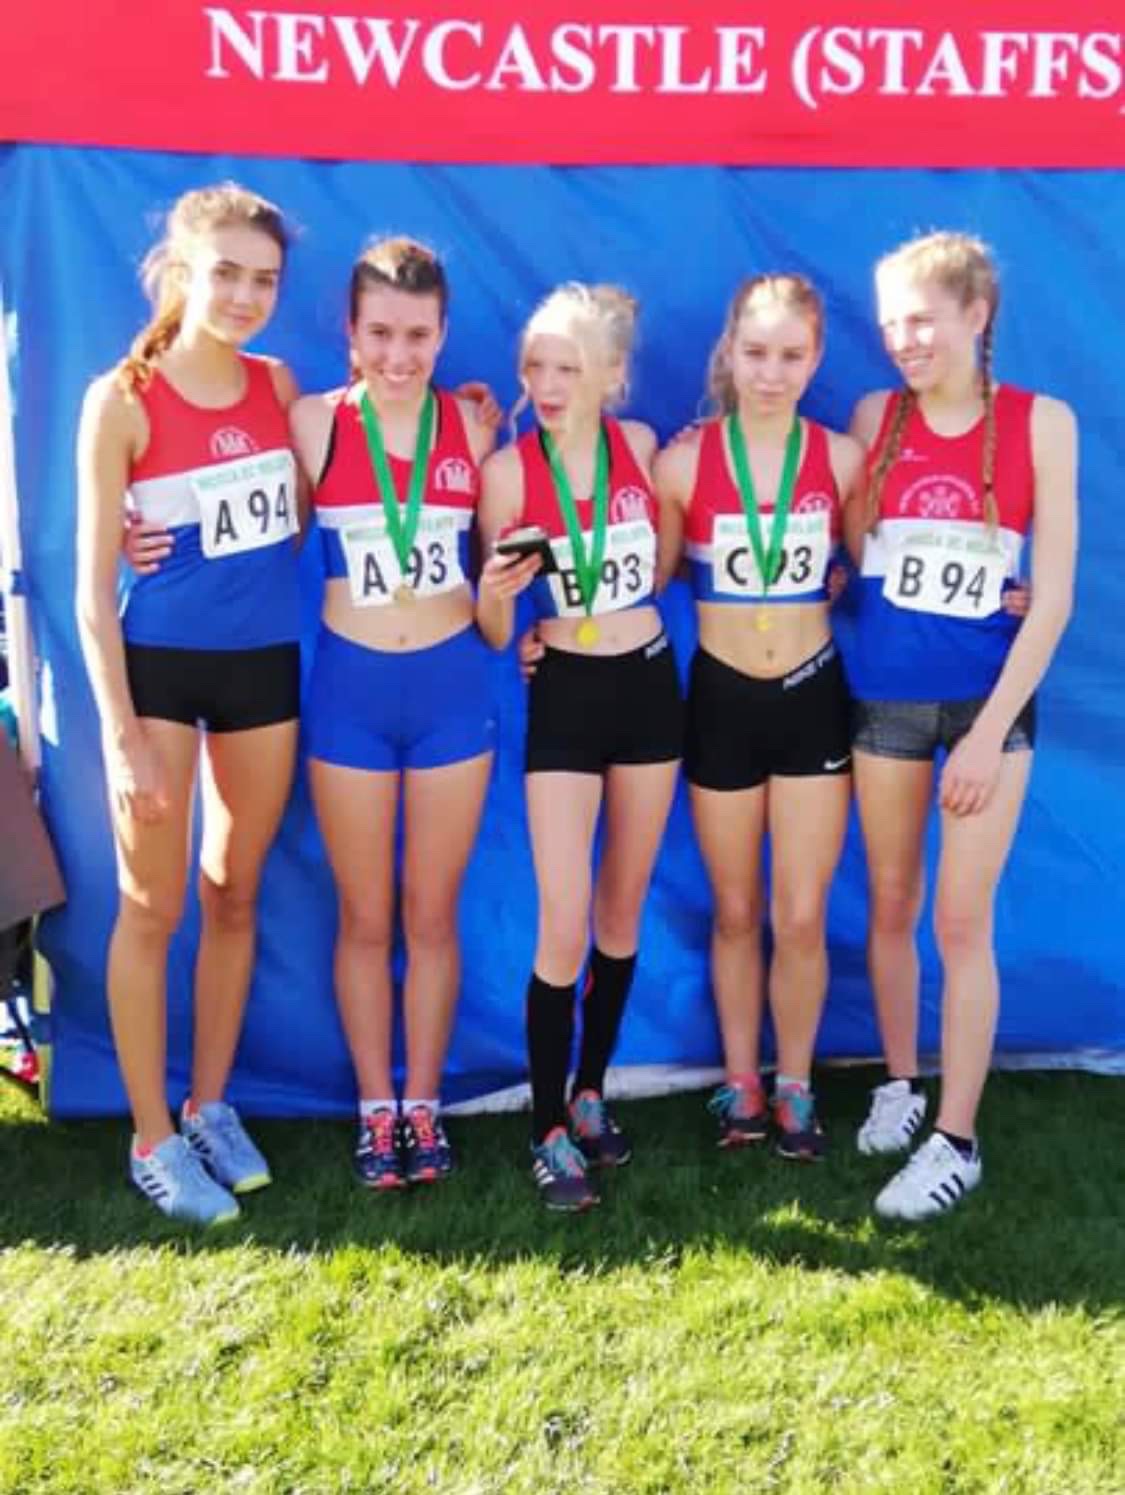 Midlands Cross Country Relay Championships – 20/10/2018